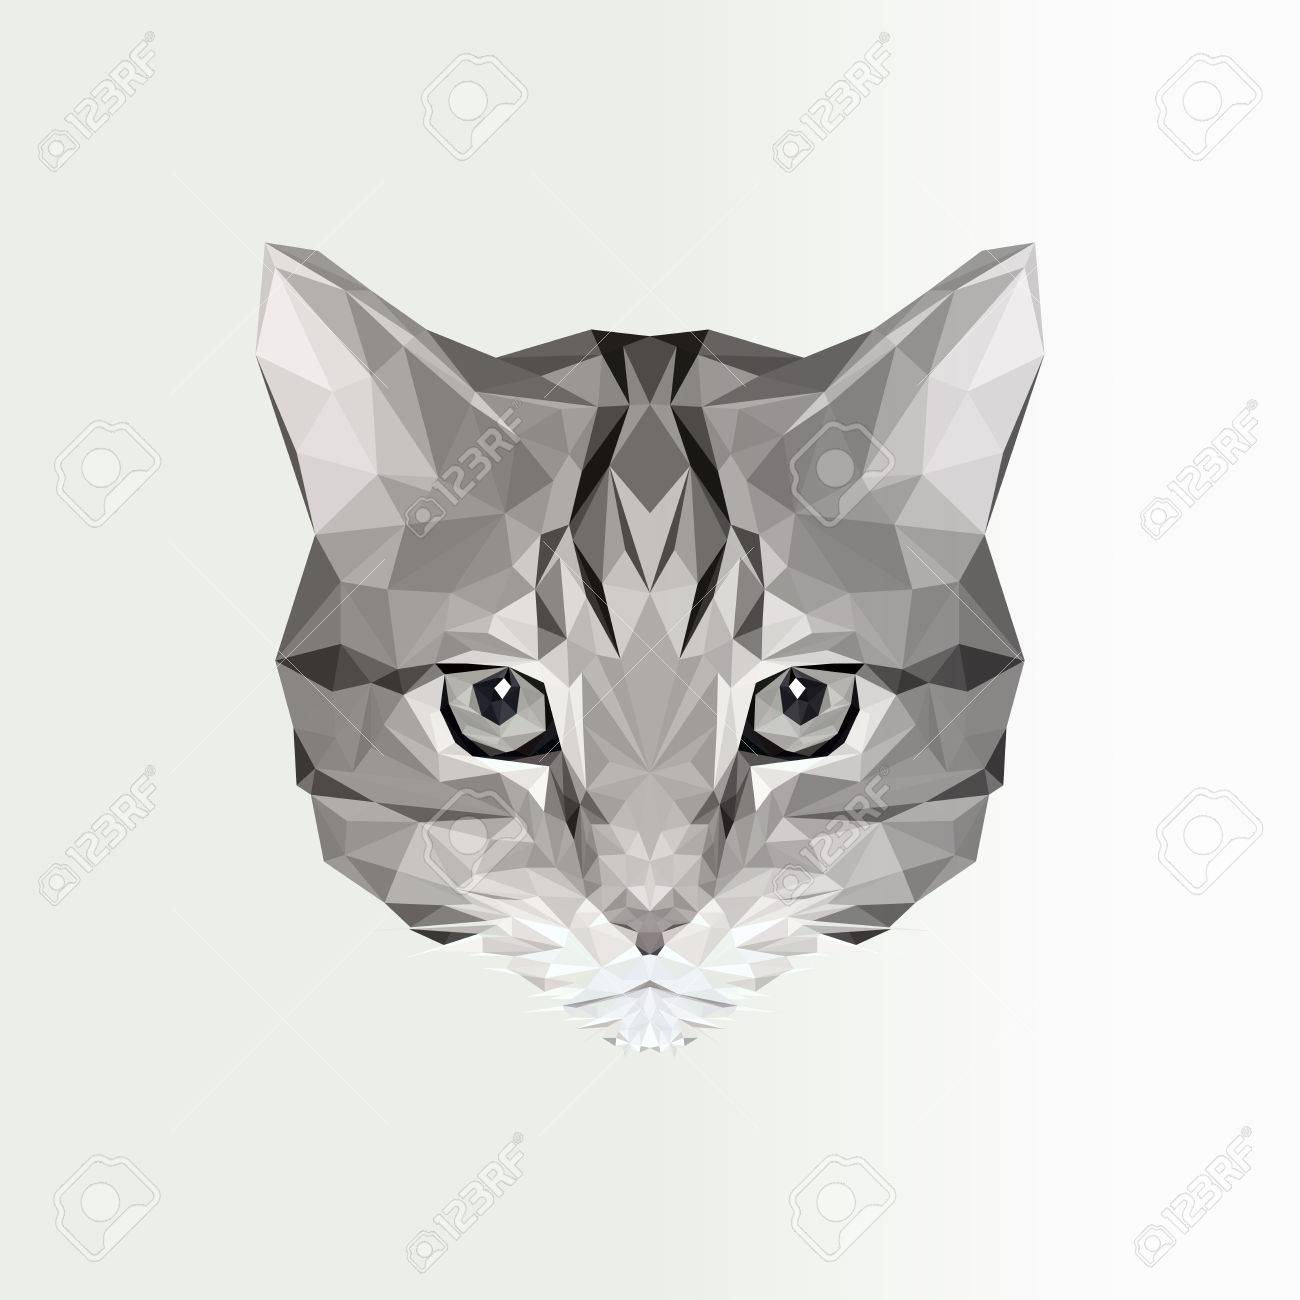 Vector Illustration Of Low Poly Cat Icon Geometric Polygonal